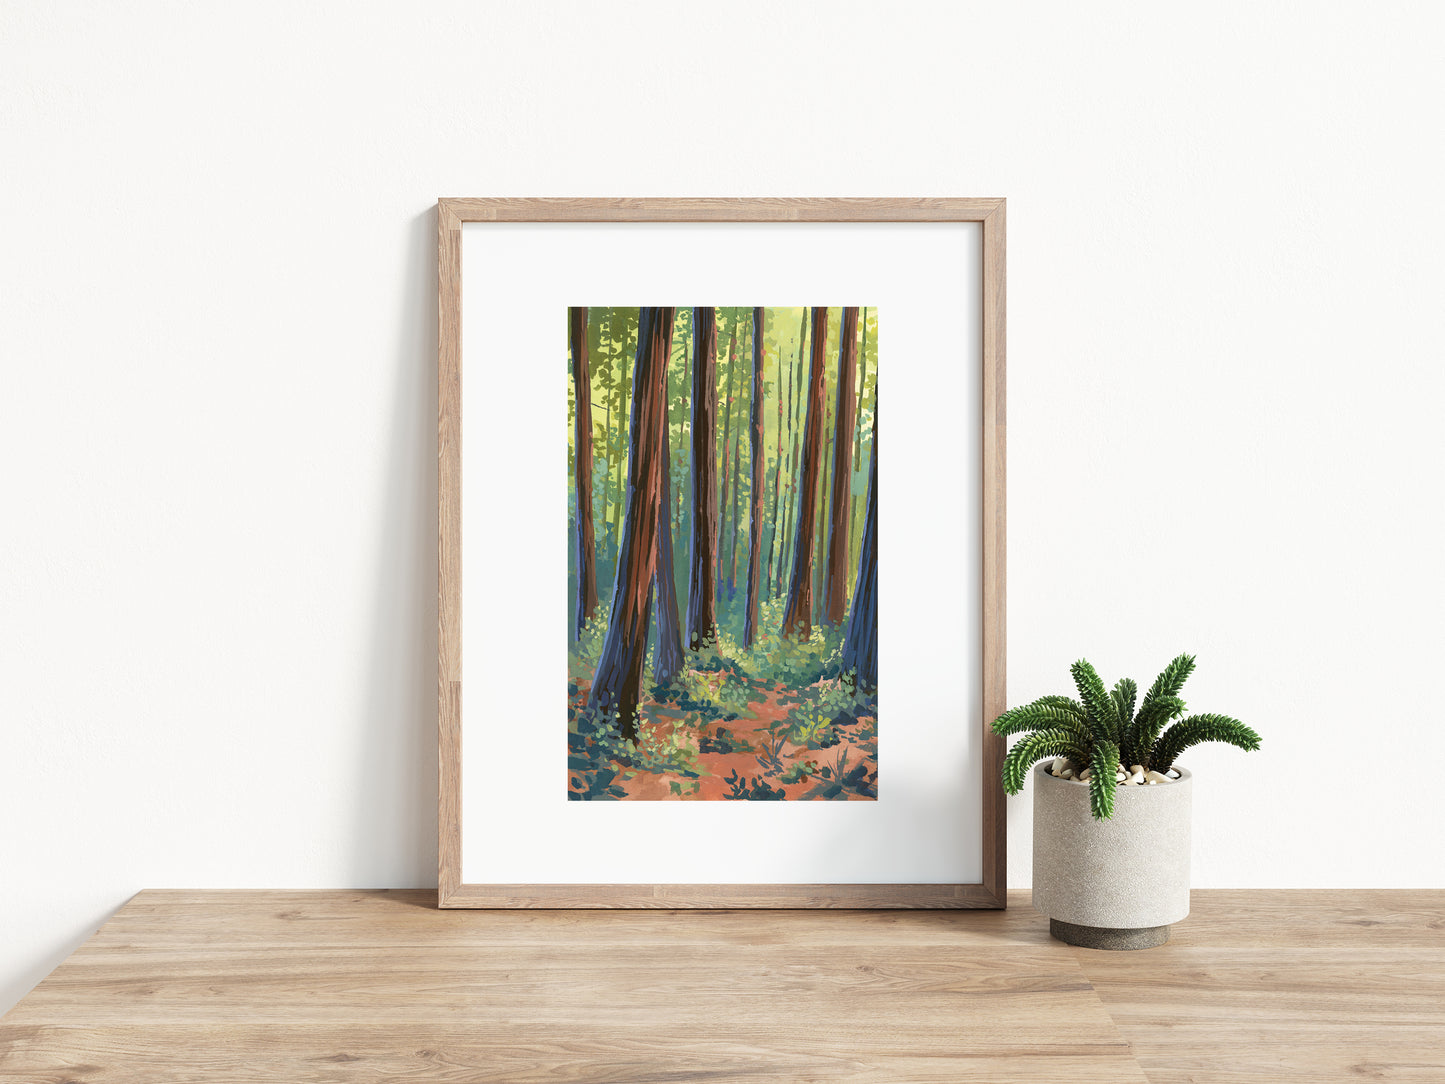 Small framed Art print of redwood trees in California’s Muir Woods National Monument.